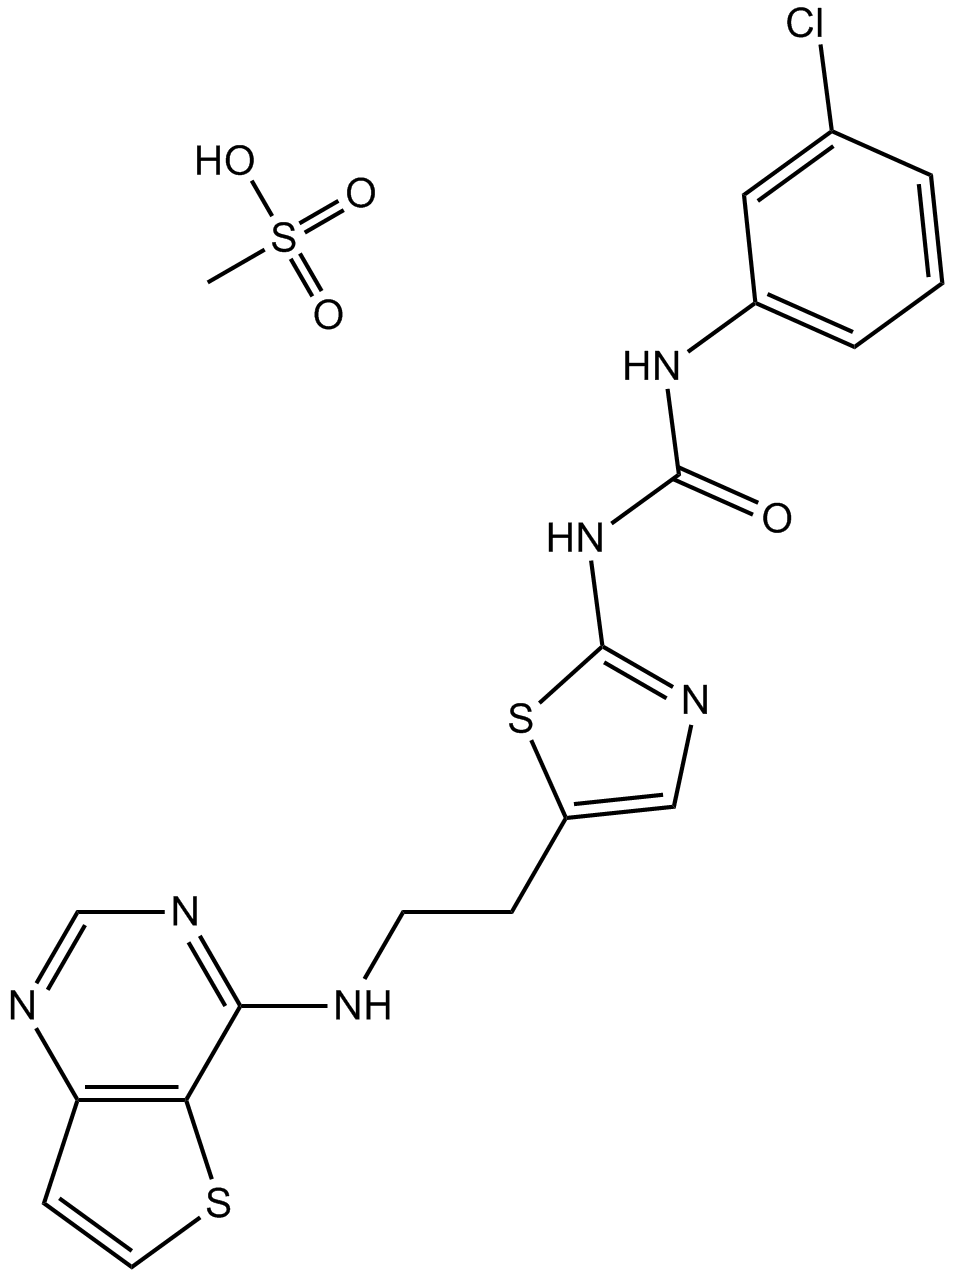 SNS-314 Mesylate  Chemical Structure